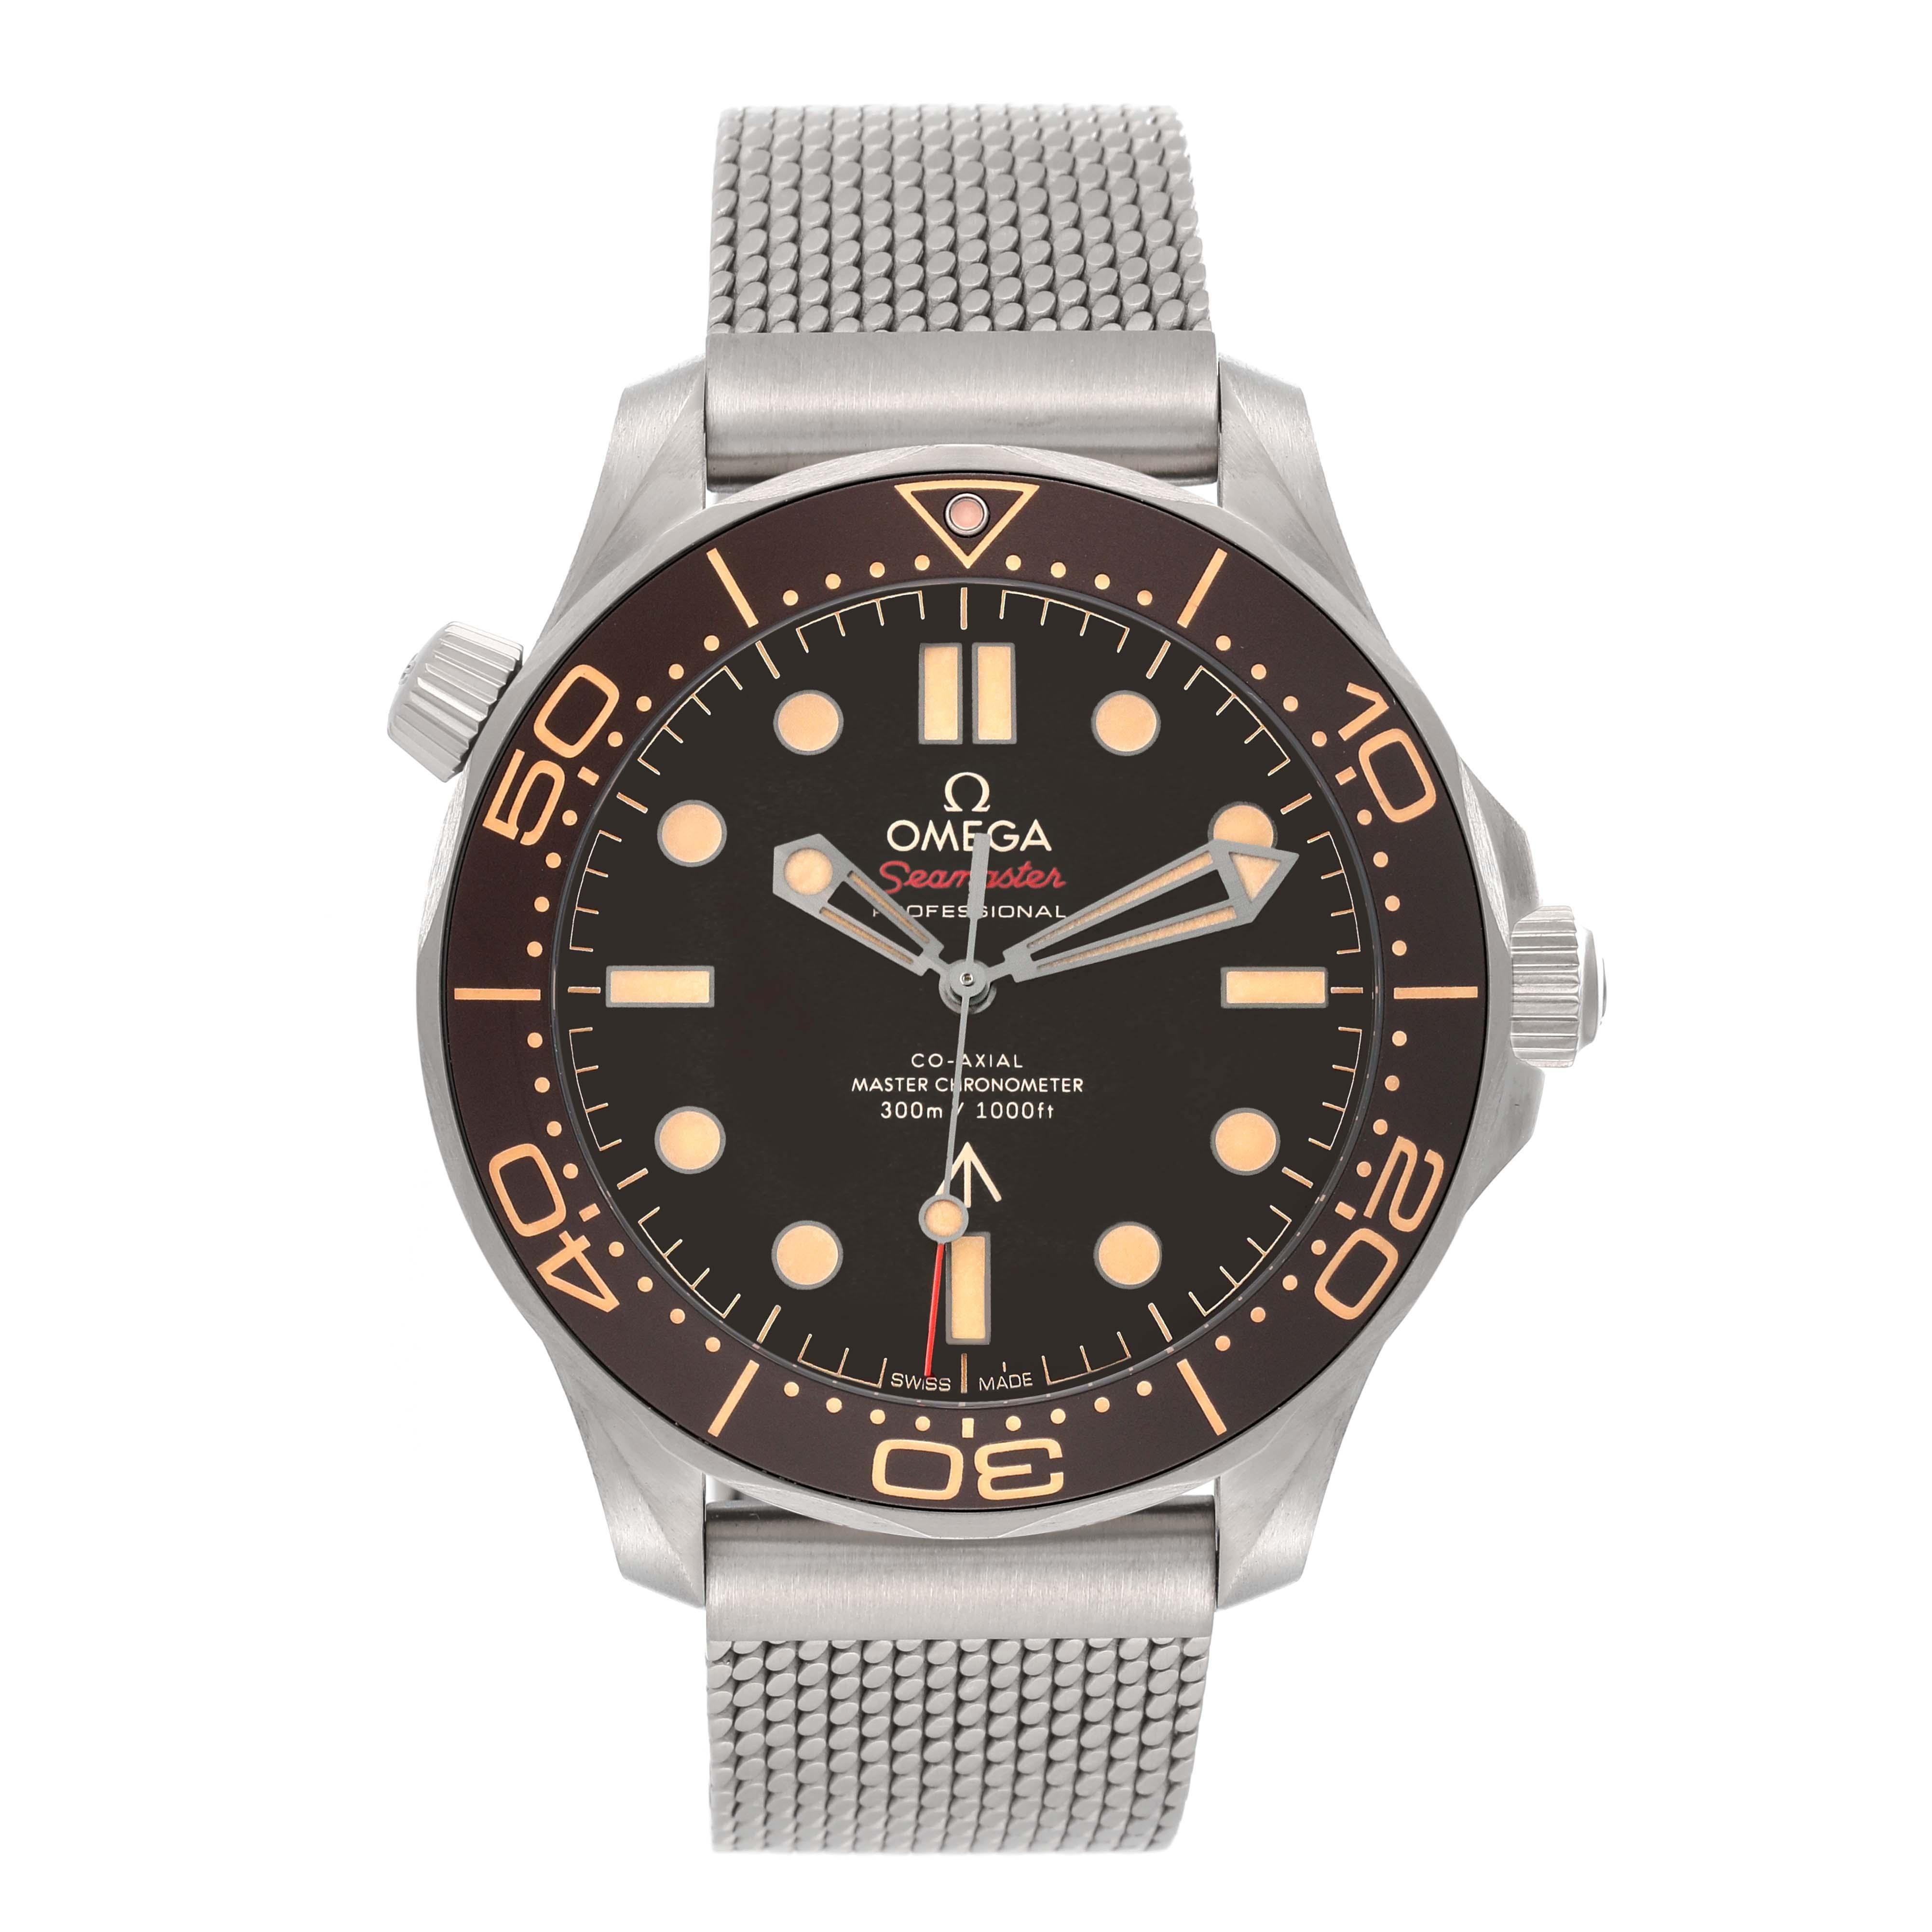 Omega Seamaster 007 Edition Titanium Mens Watch 210.92.42.20.01.001 Box Card. Automatic self-winding movement. Titanium round case 42.0 mm in diameter. Brown unidirectional rotating bezel. Scratch resistant sapphire crystal. Matte tropical brown